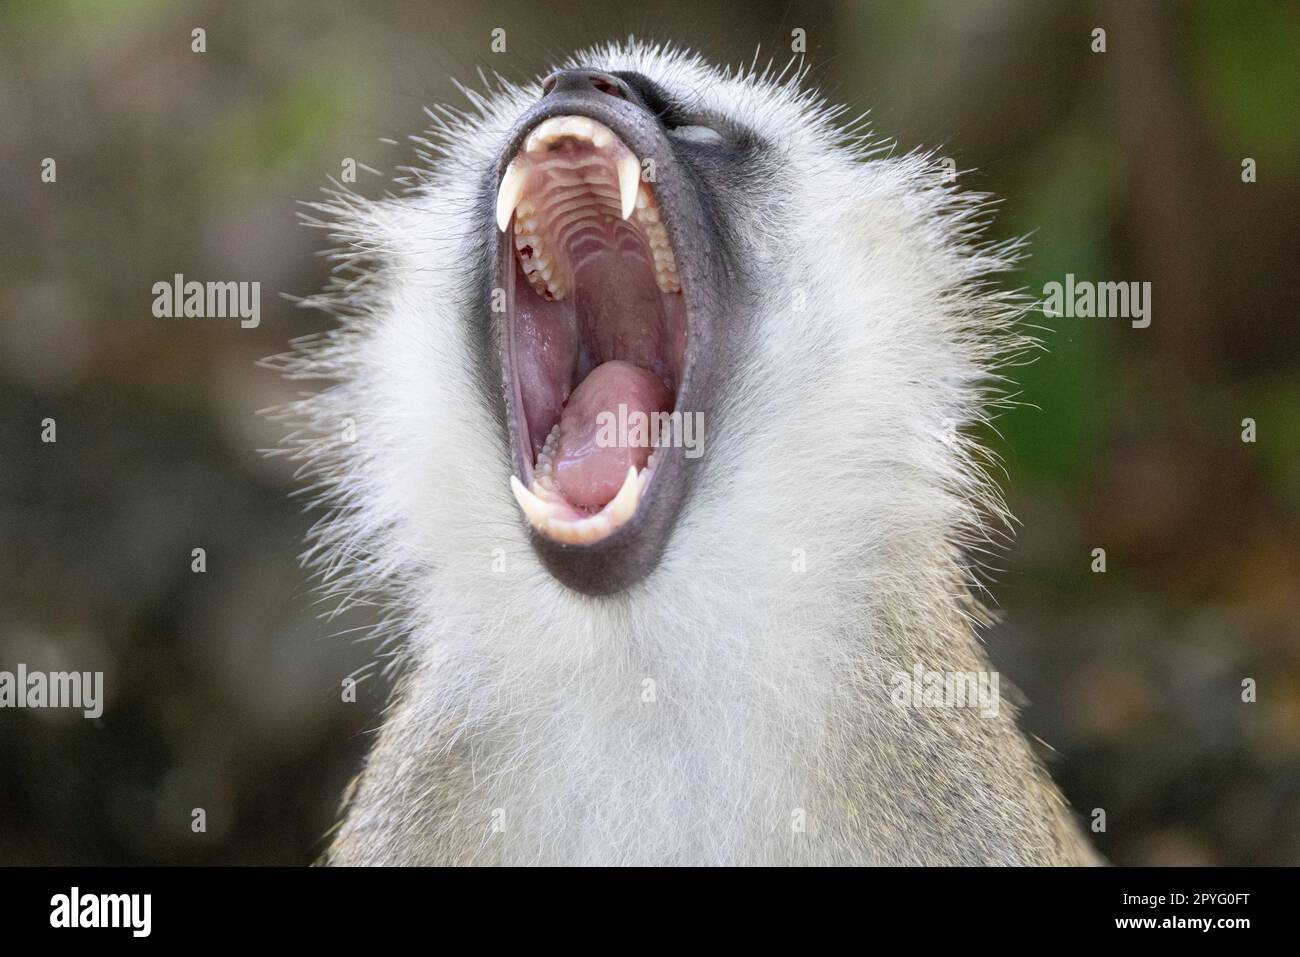 A close-up portrait of a vervet monkey in Kenya with its mouth open wide, revealing its sharp teeth Stock Photo